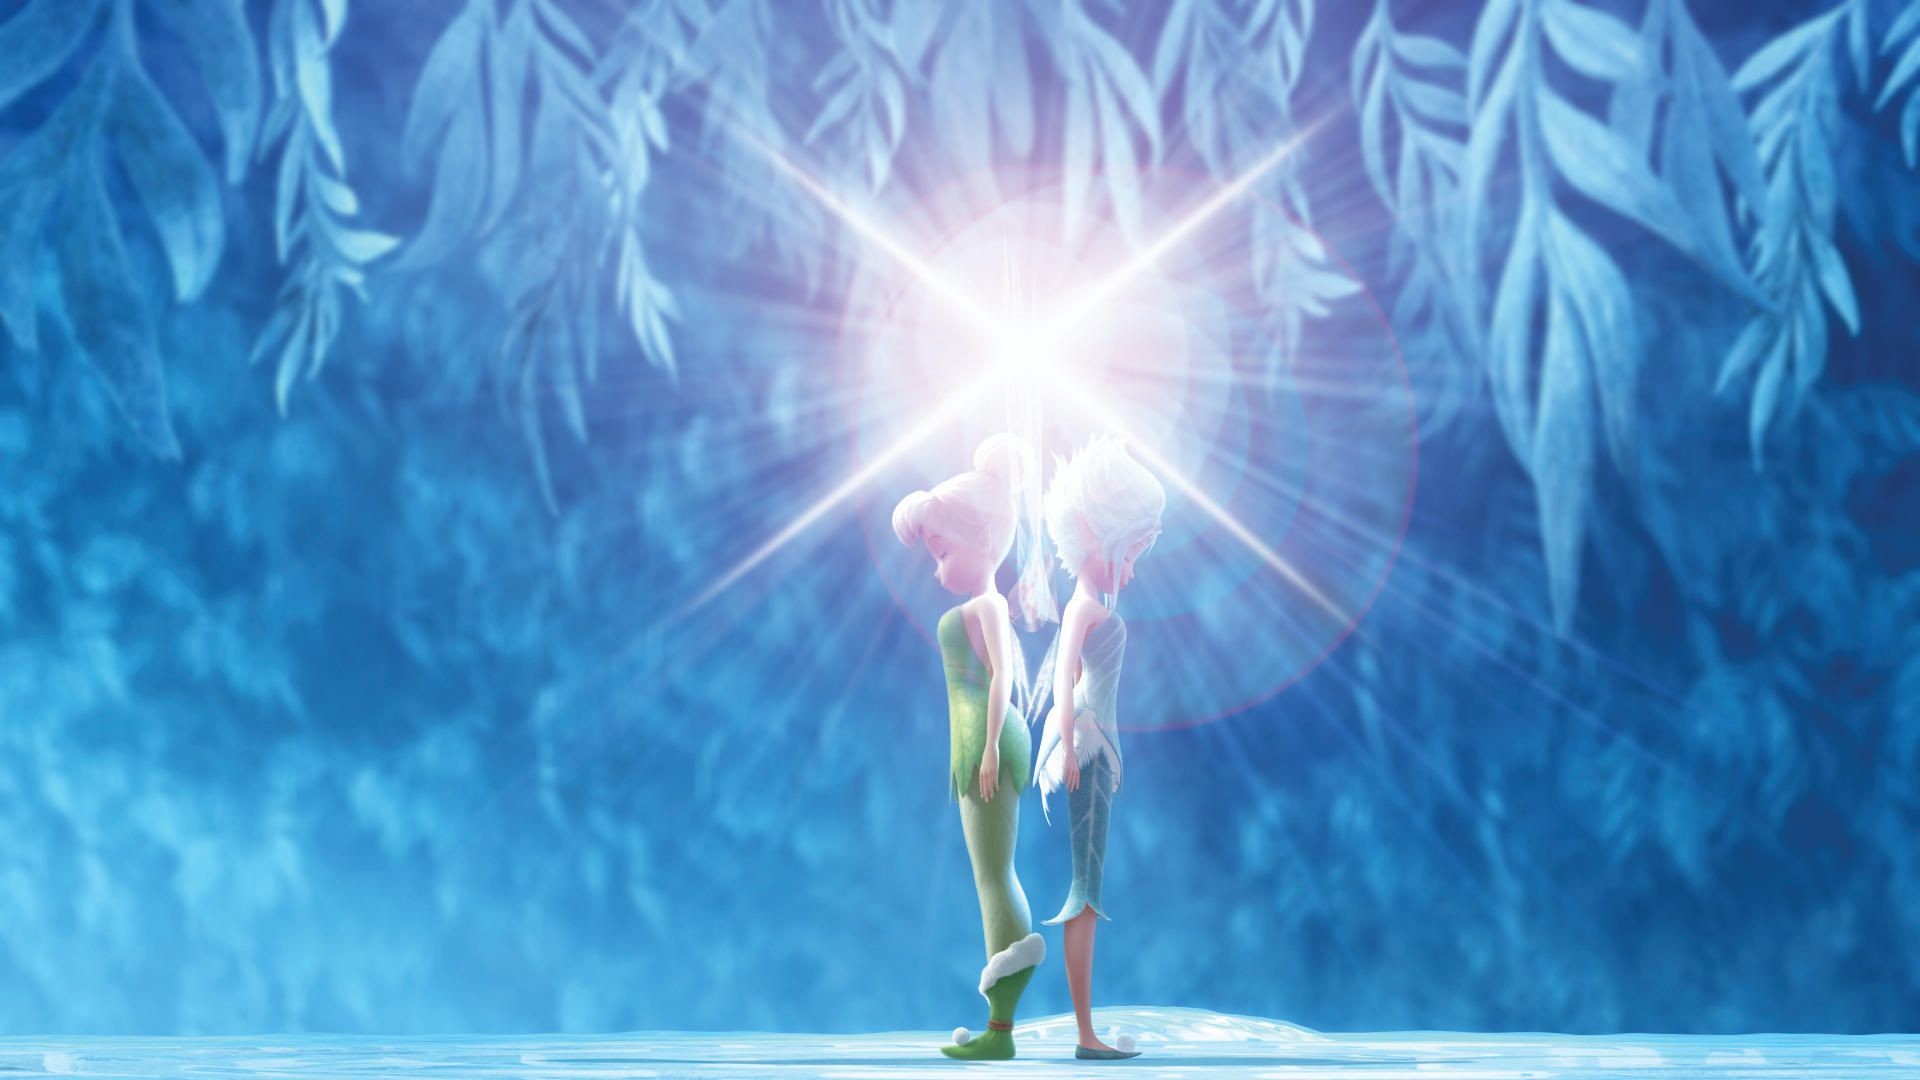 1920x1080 Secret Of The Wings Tinkerbell And The Mysterious Winter Woods Hd Desktop  Wallpaper : Crazy Wallpapers